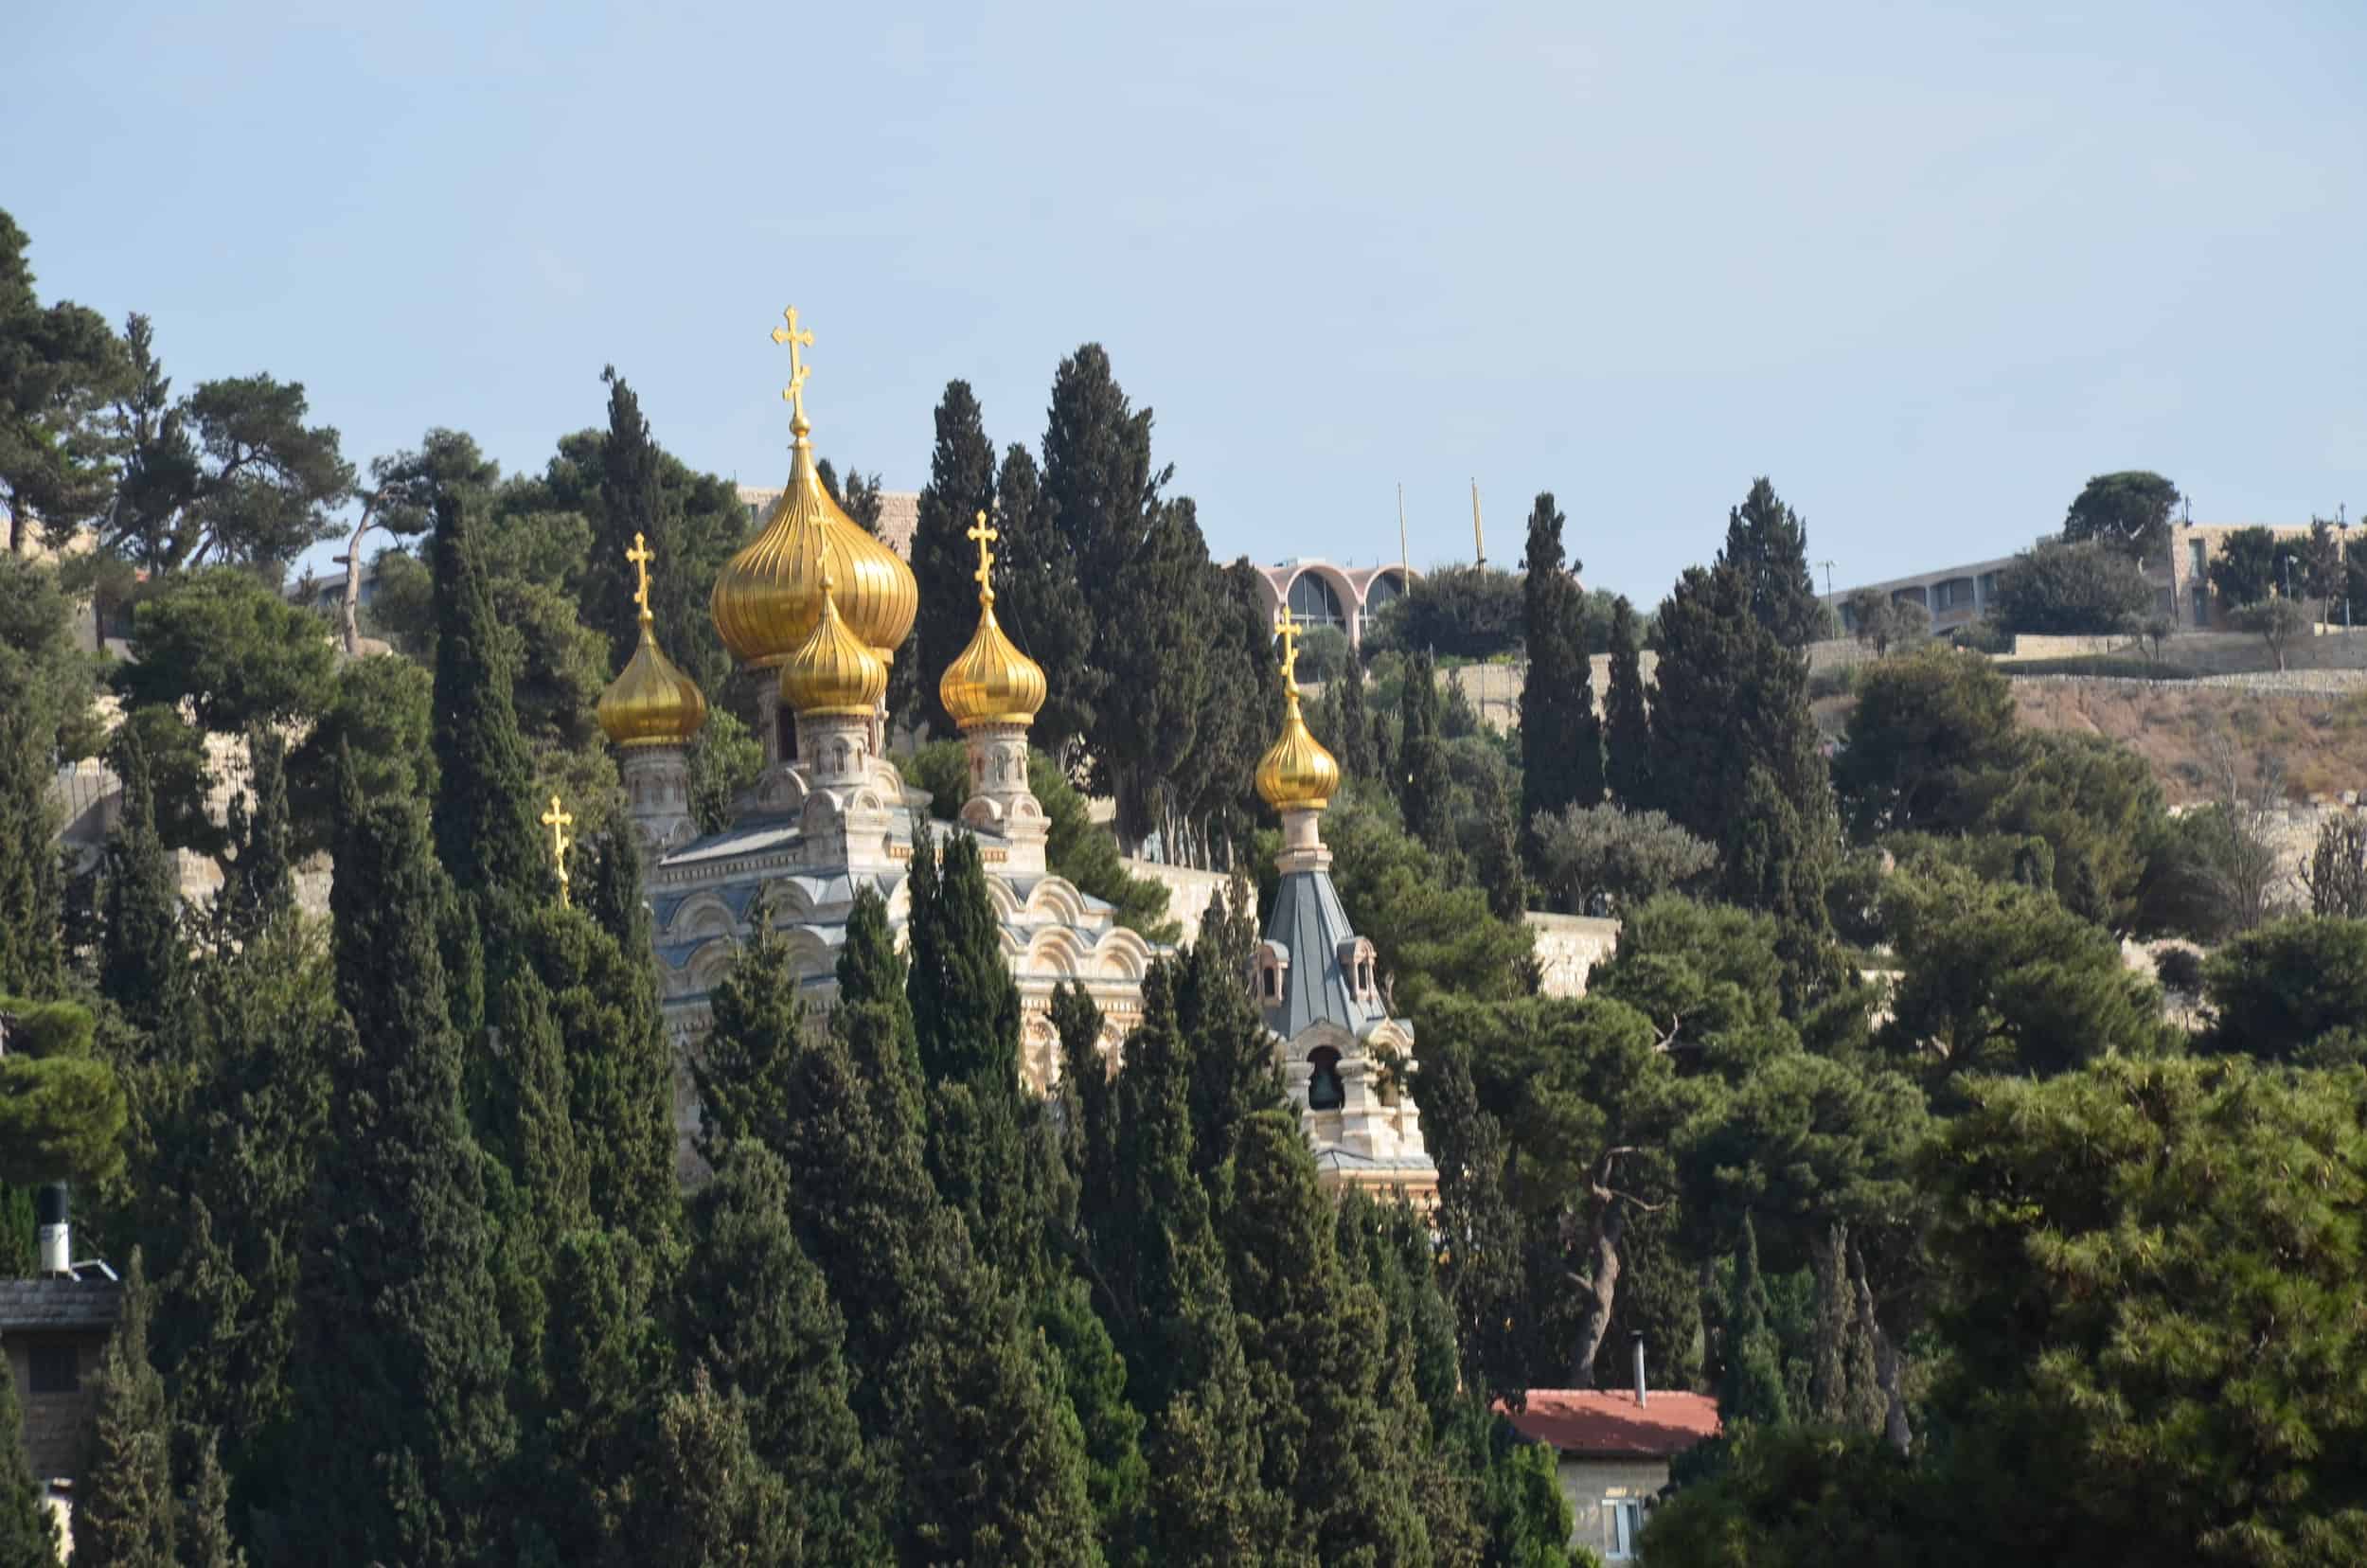 Domes of the Church of Mary Magdalene at Gethsemane in Jerusalem